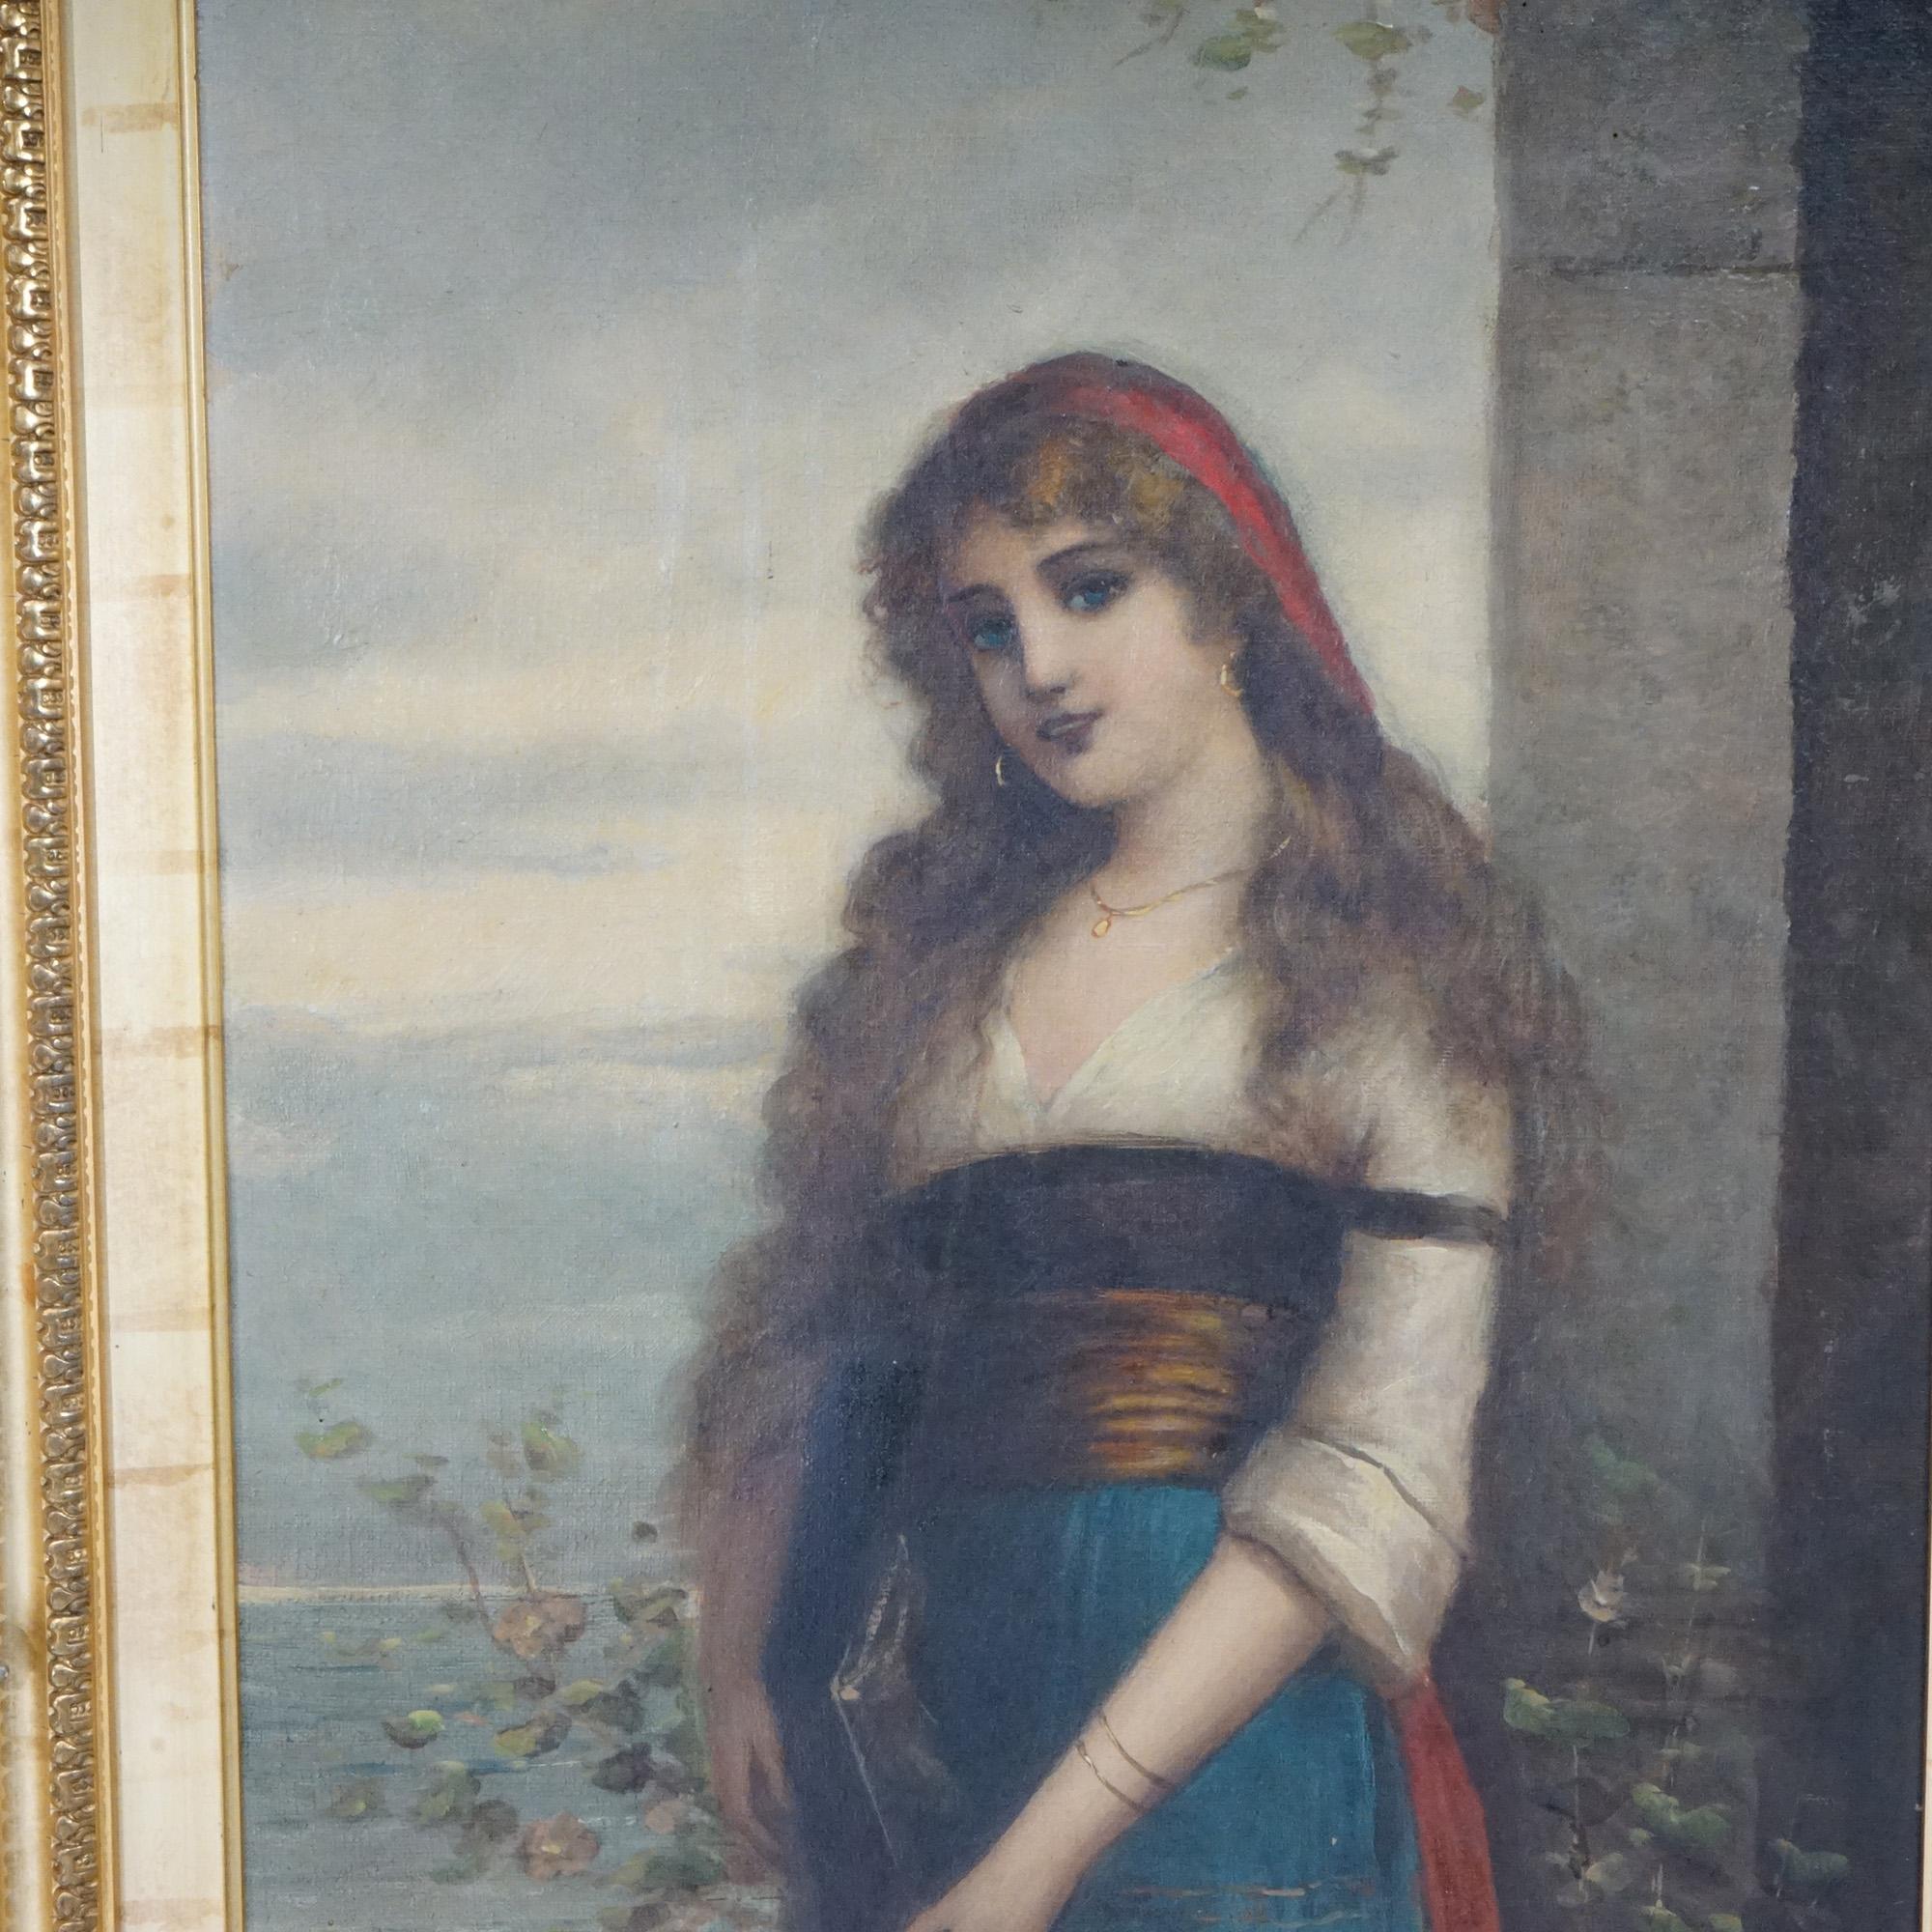 An antique painting by Egisto Ferroni offers portrait of a young woman with her lute (string instrument) standing in a doorway, artist signed lower left, seated in giltwood frame, 19th century

Measures - overall 41.5''H x 23''W x 4''D; sight